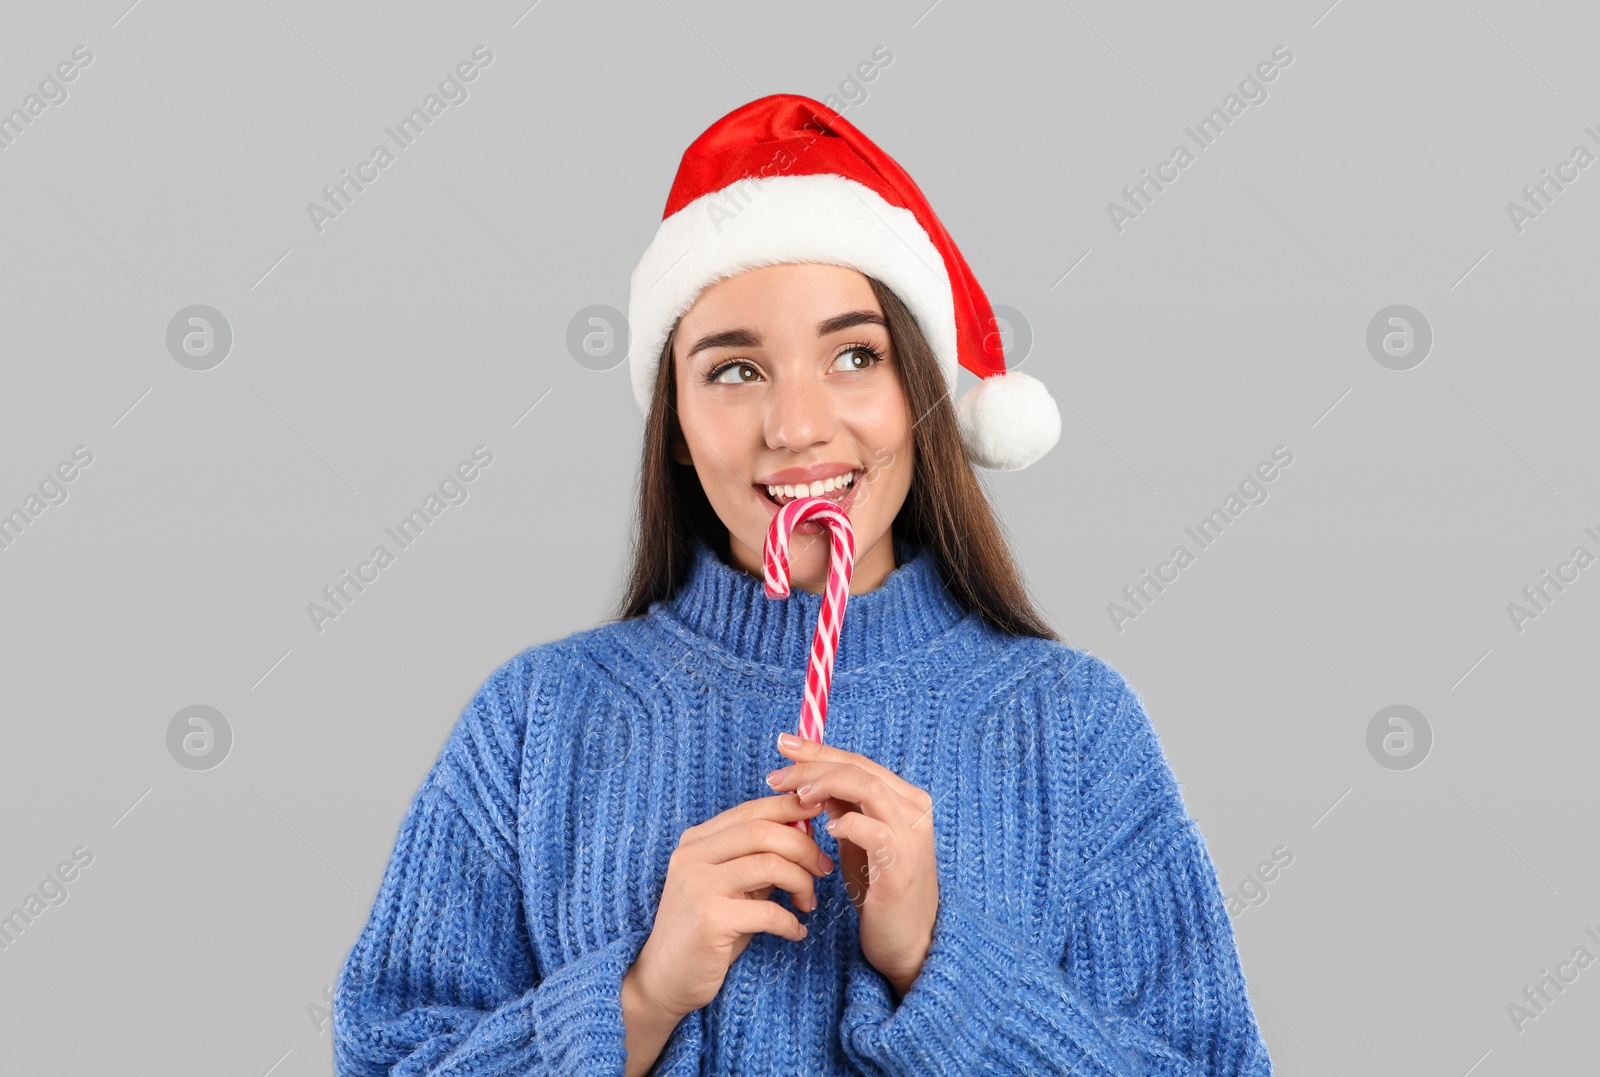 Photo of Young woman in blue sweater and Santa hat holding candy cane on grey background. Celebrating Christmas